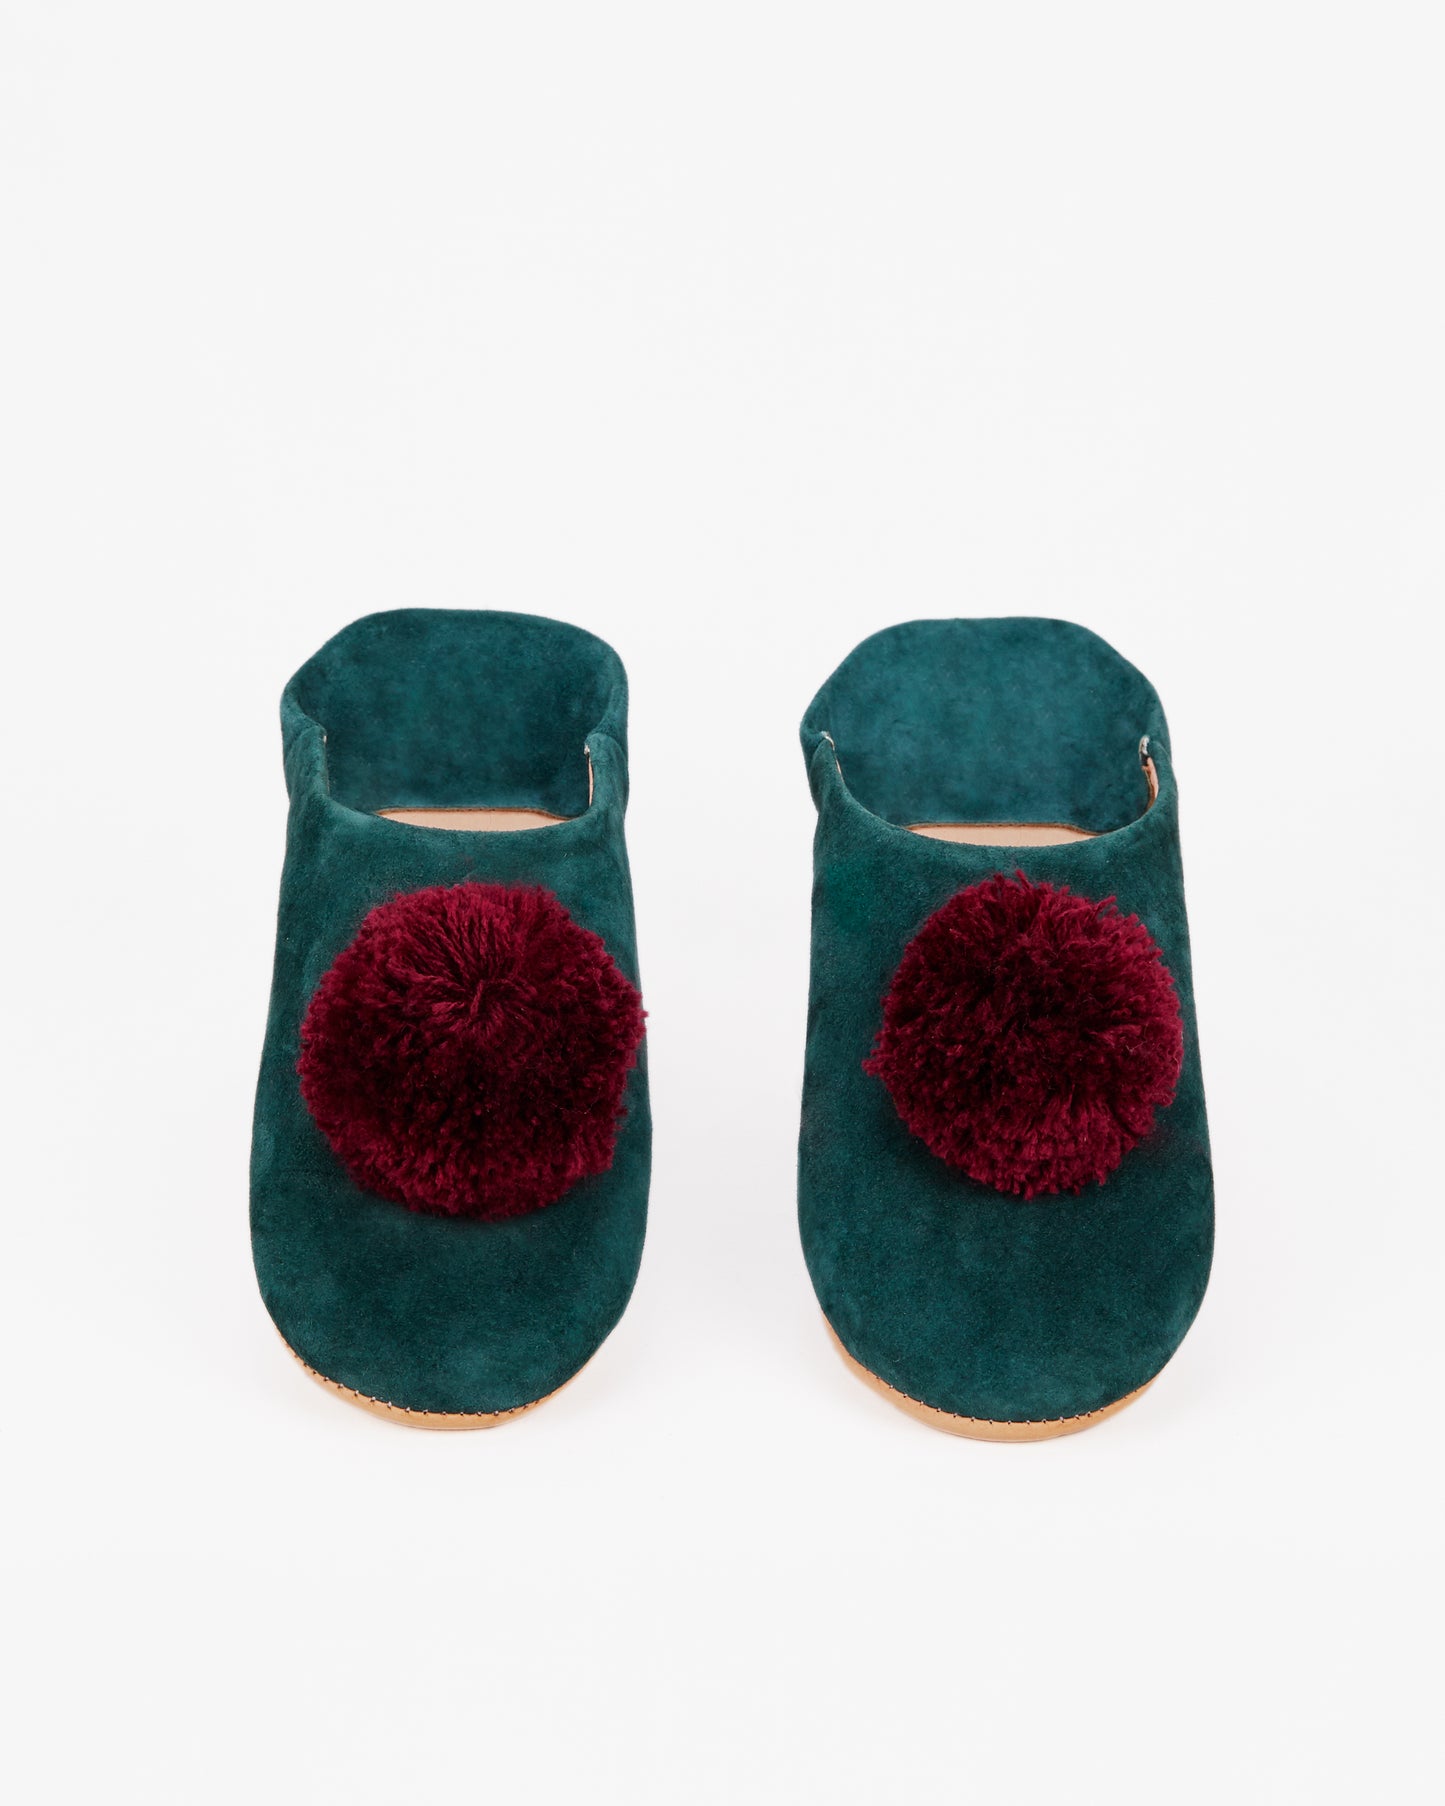 Moroccan Slippers, Teal/Red Pom Poms